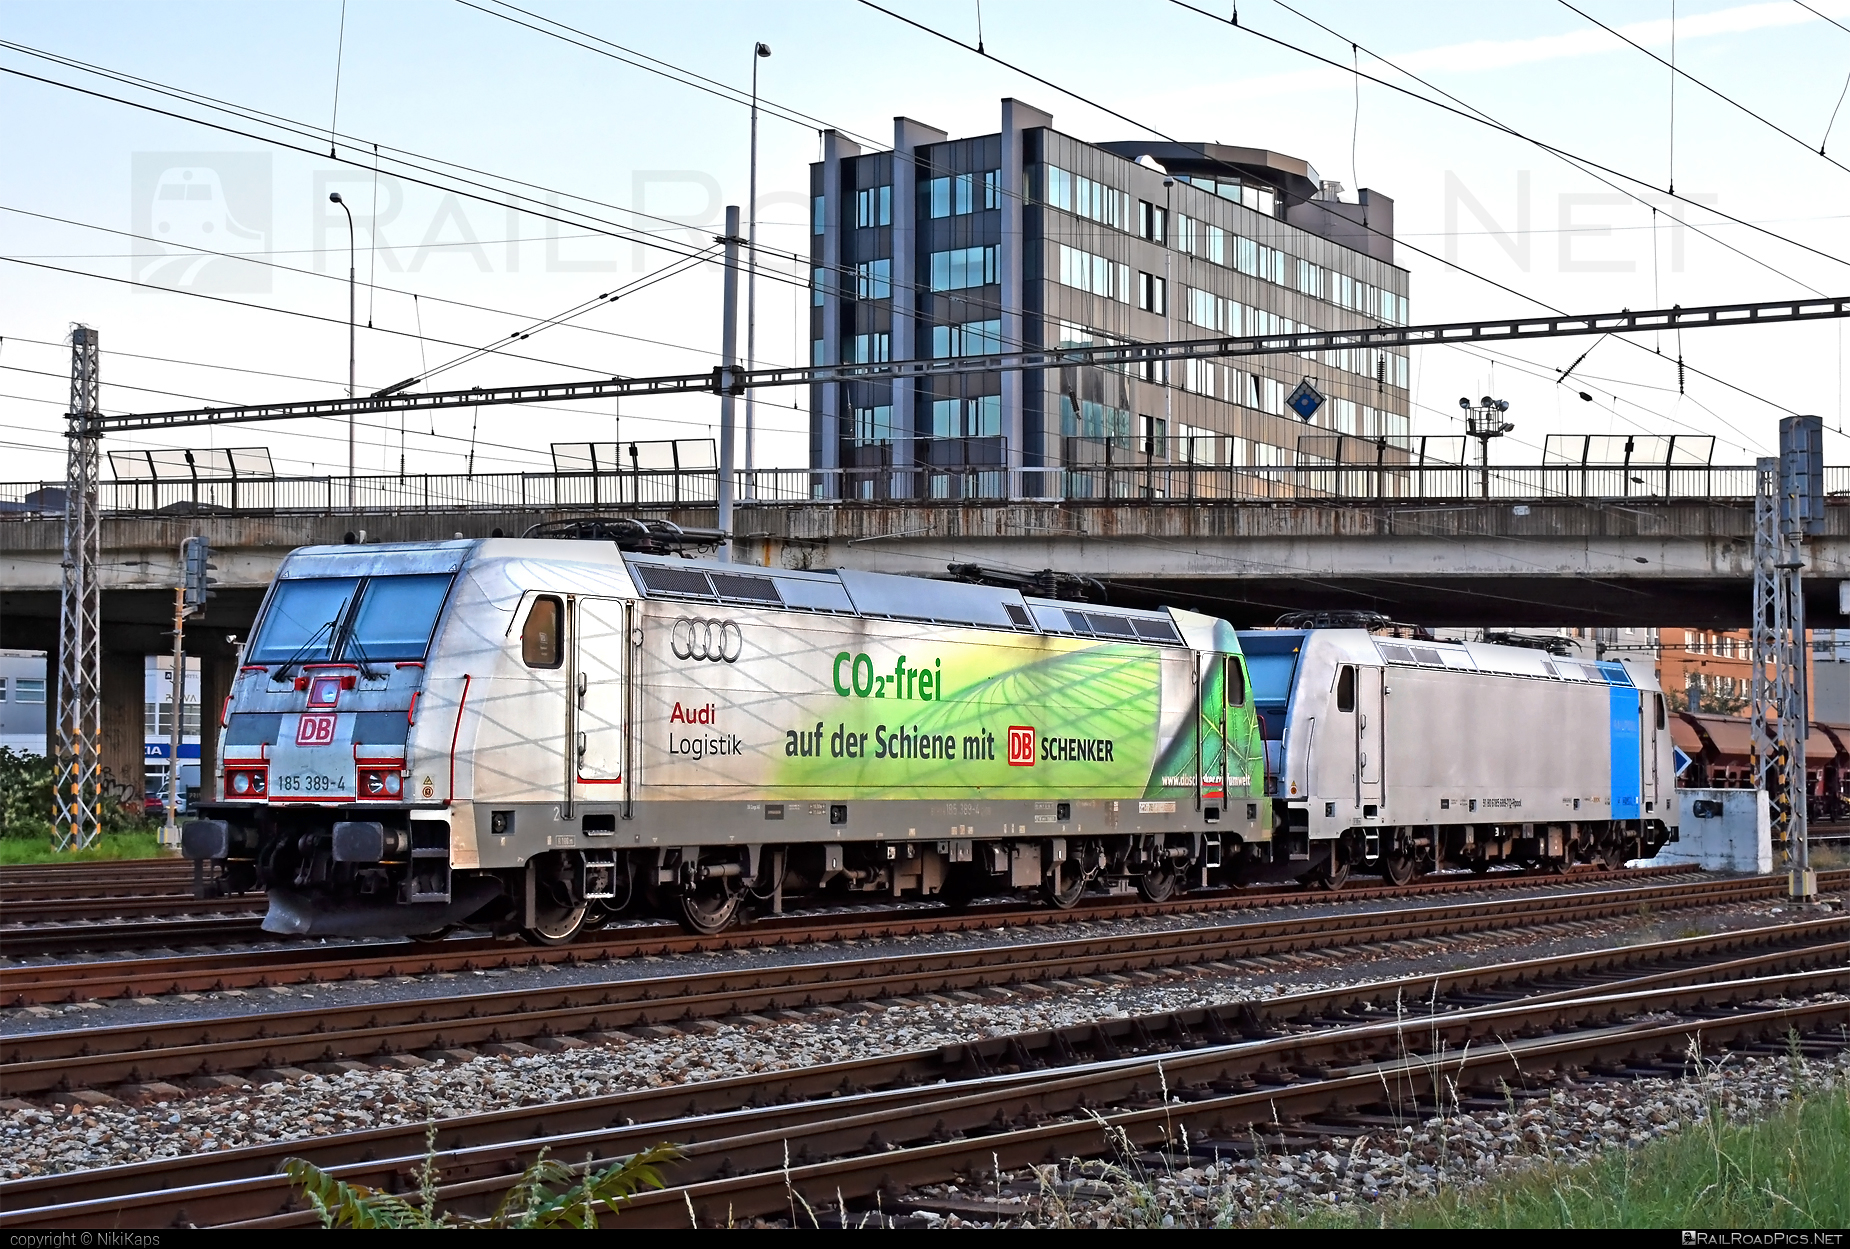 Bombardier TRAXX F140 AC2 - 185 389-4 operated by DB Cargo AG #bombardier #bombardiertraxx #db #dbcargo #dbcargoag #deutschebahn #traxx #traxxf140 #traxxf140ac #traxxf140ac2